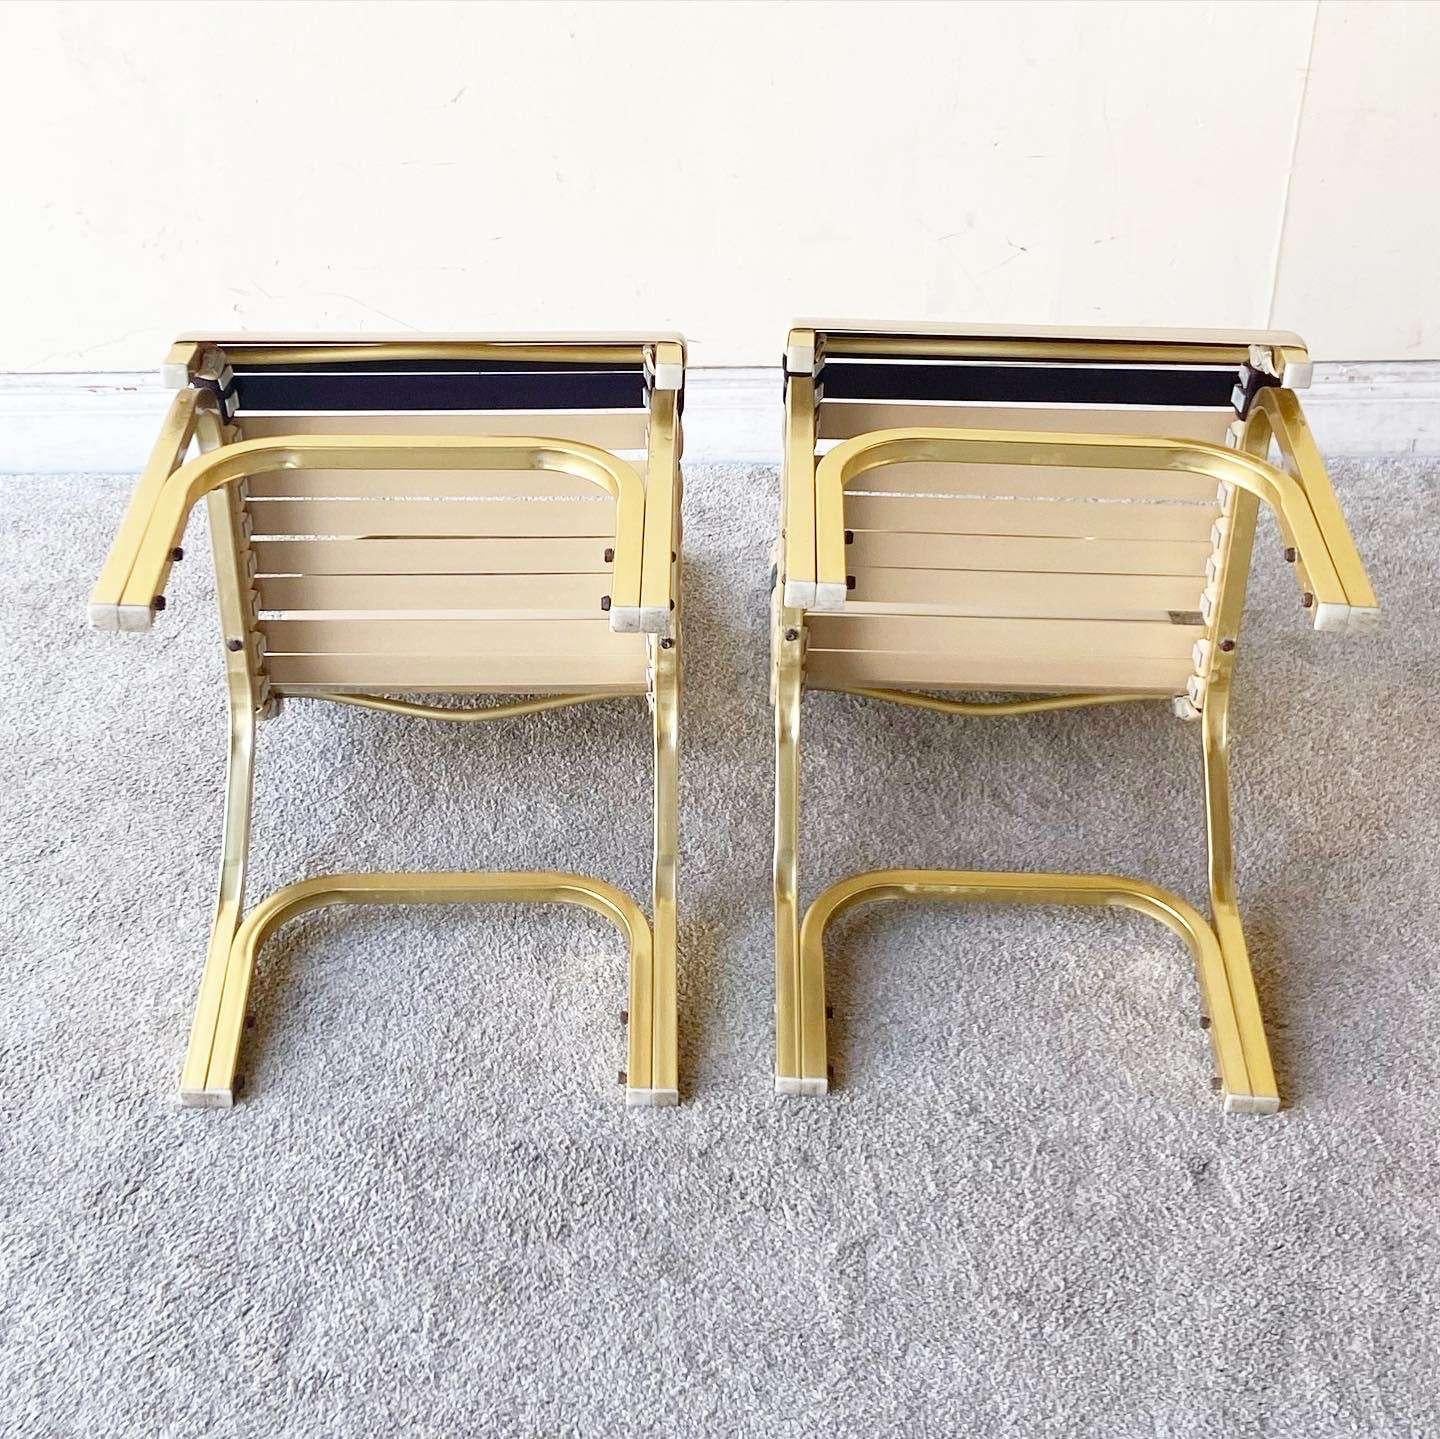 Miami Gold Beige & Blue Metal Poolside Chairs and Table - 3 Pieces In Good Condition For Sale In Delray Beach, FL